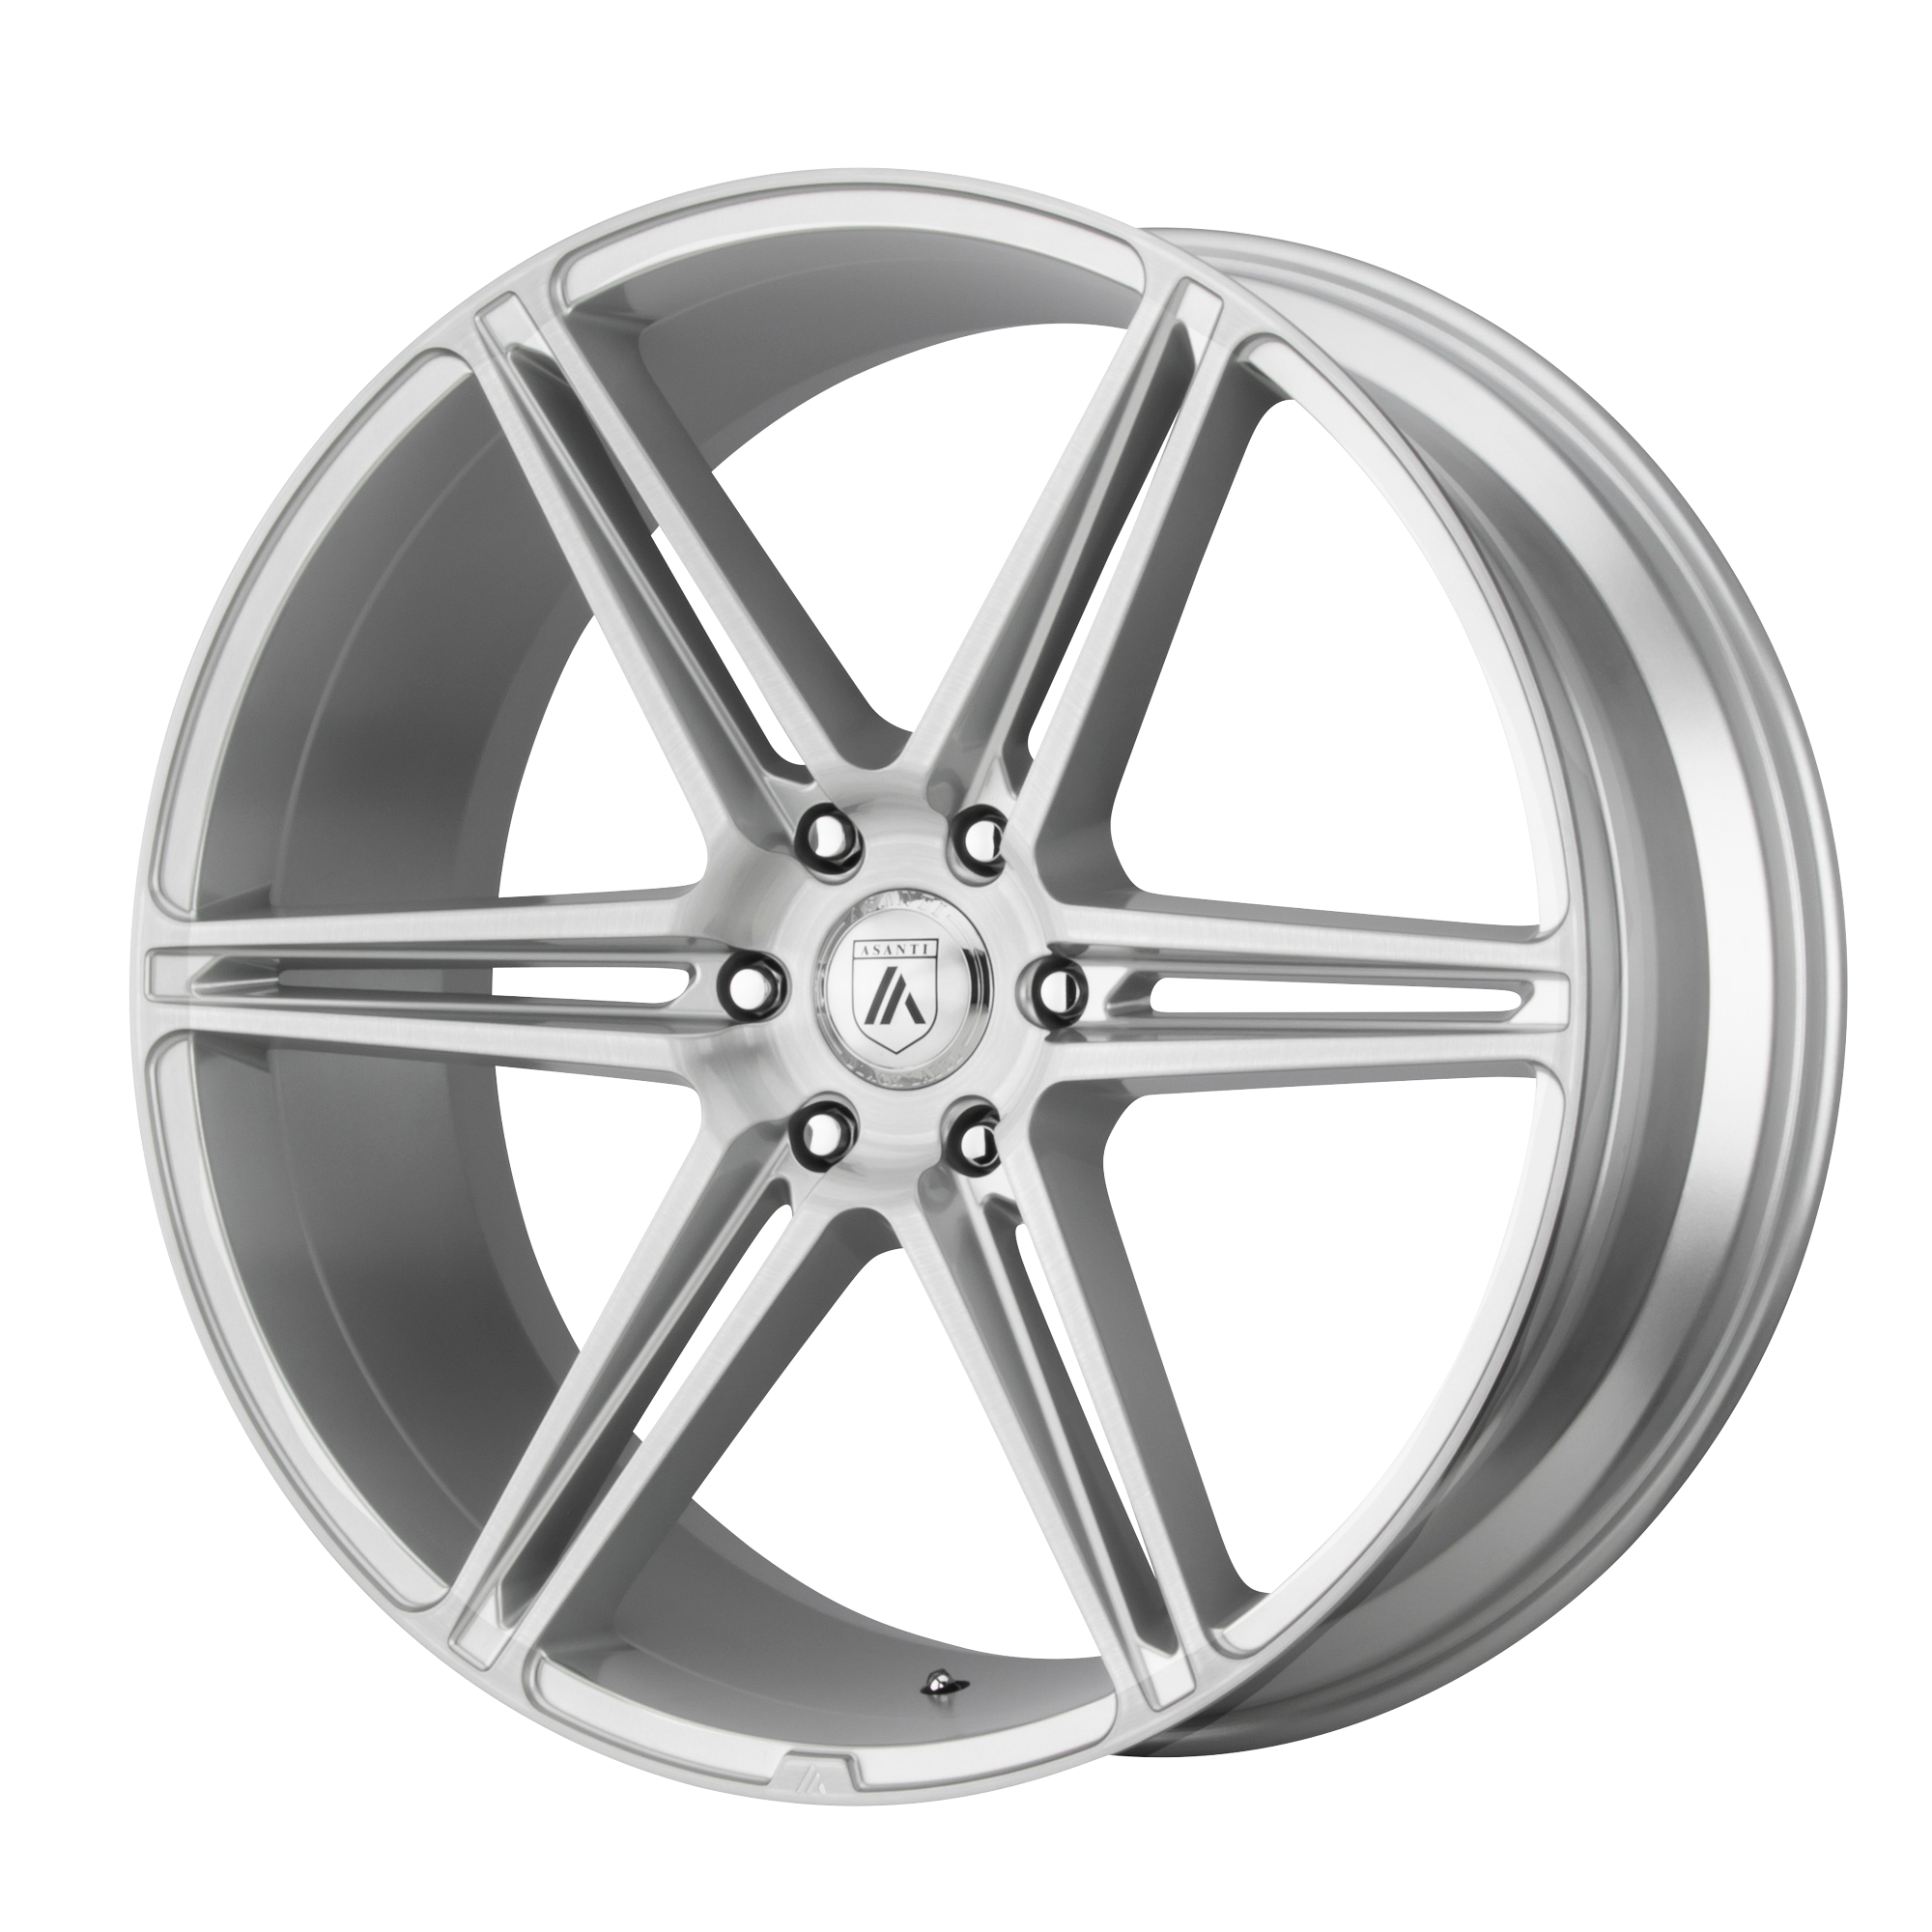 ALPHA 6 24x10 6x135.00 BRUSHED SILVER (30 mm) - Tires and Engine Performance